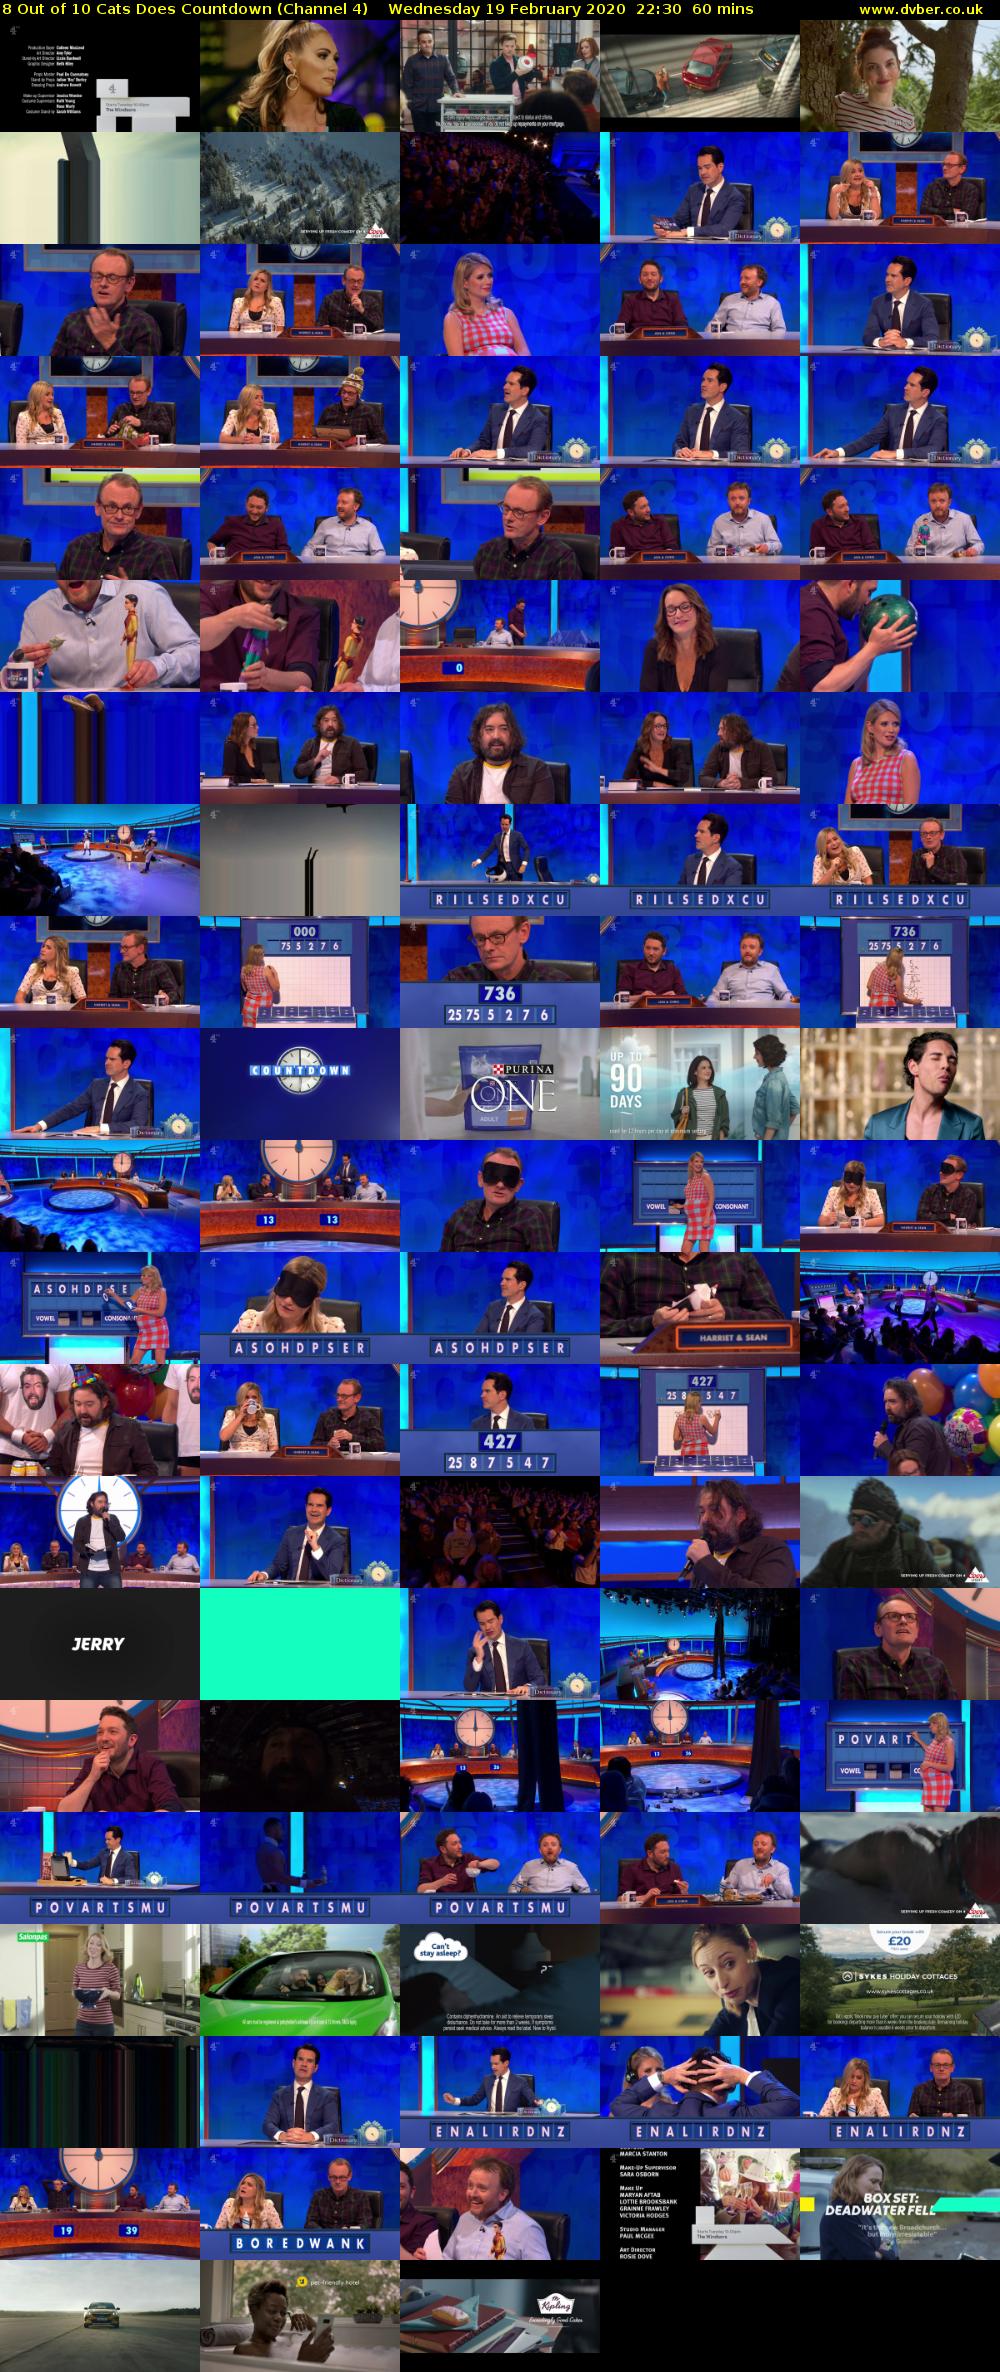 8 Out of 10 Cats Does Countdown (Channel 4) Wednesday 19 February 2020 22:30 - 23:30